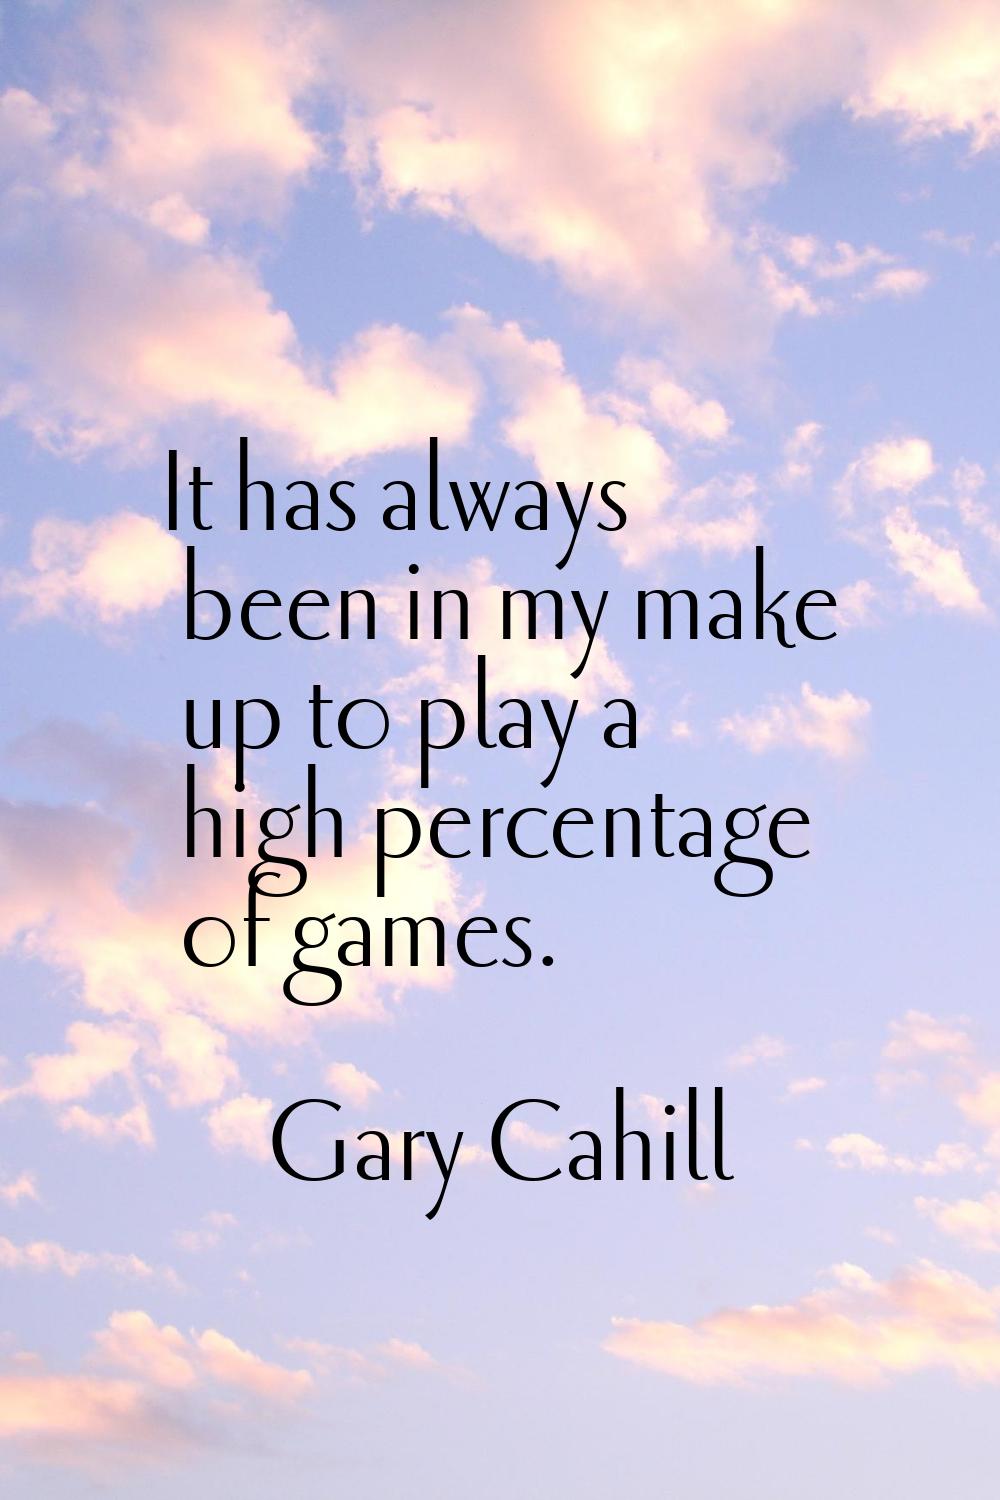 It has always been in my make up to play a high percentage of games.